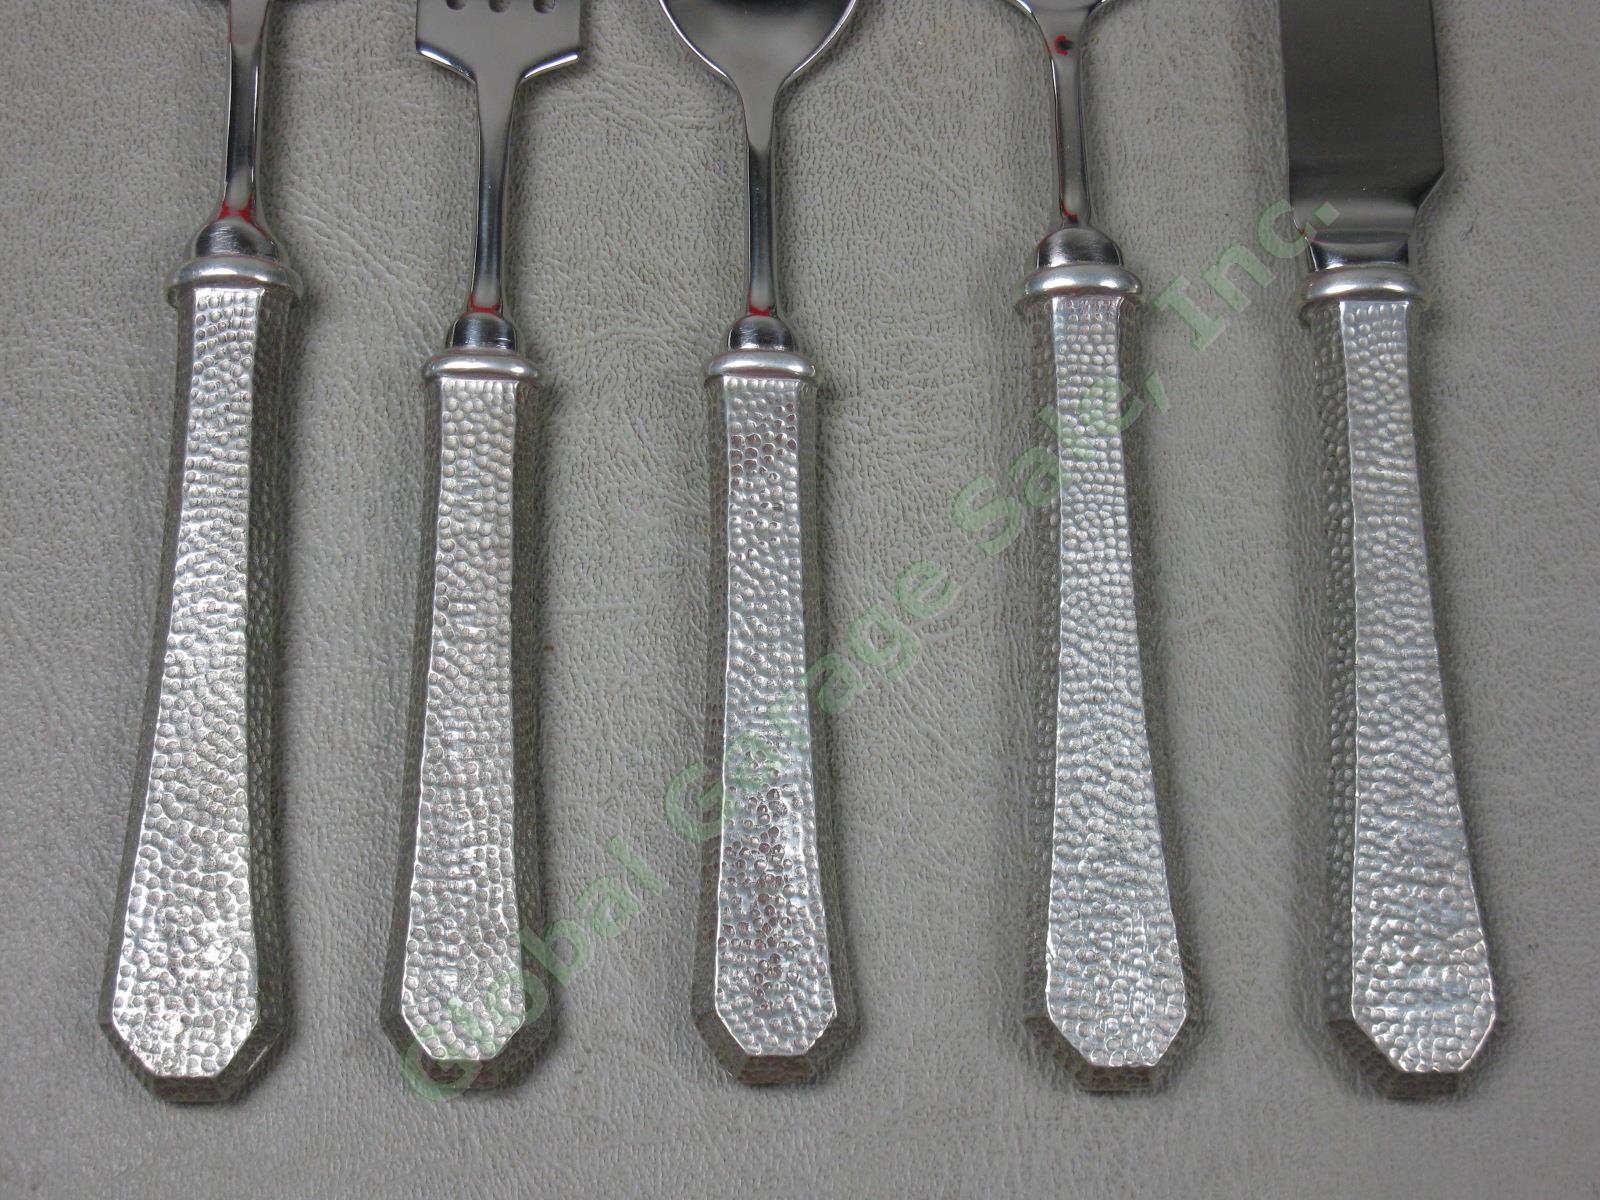 2 NEW 5-Piece Vagabond House Classic Hammered Pewter Flatware Place Settings NR! 3